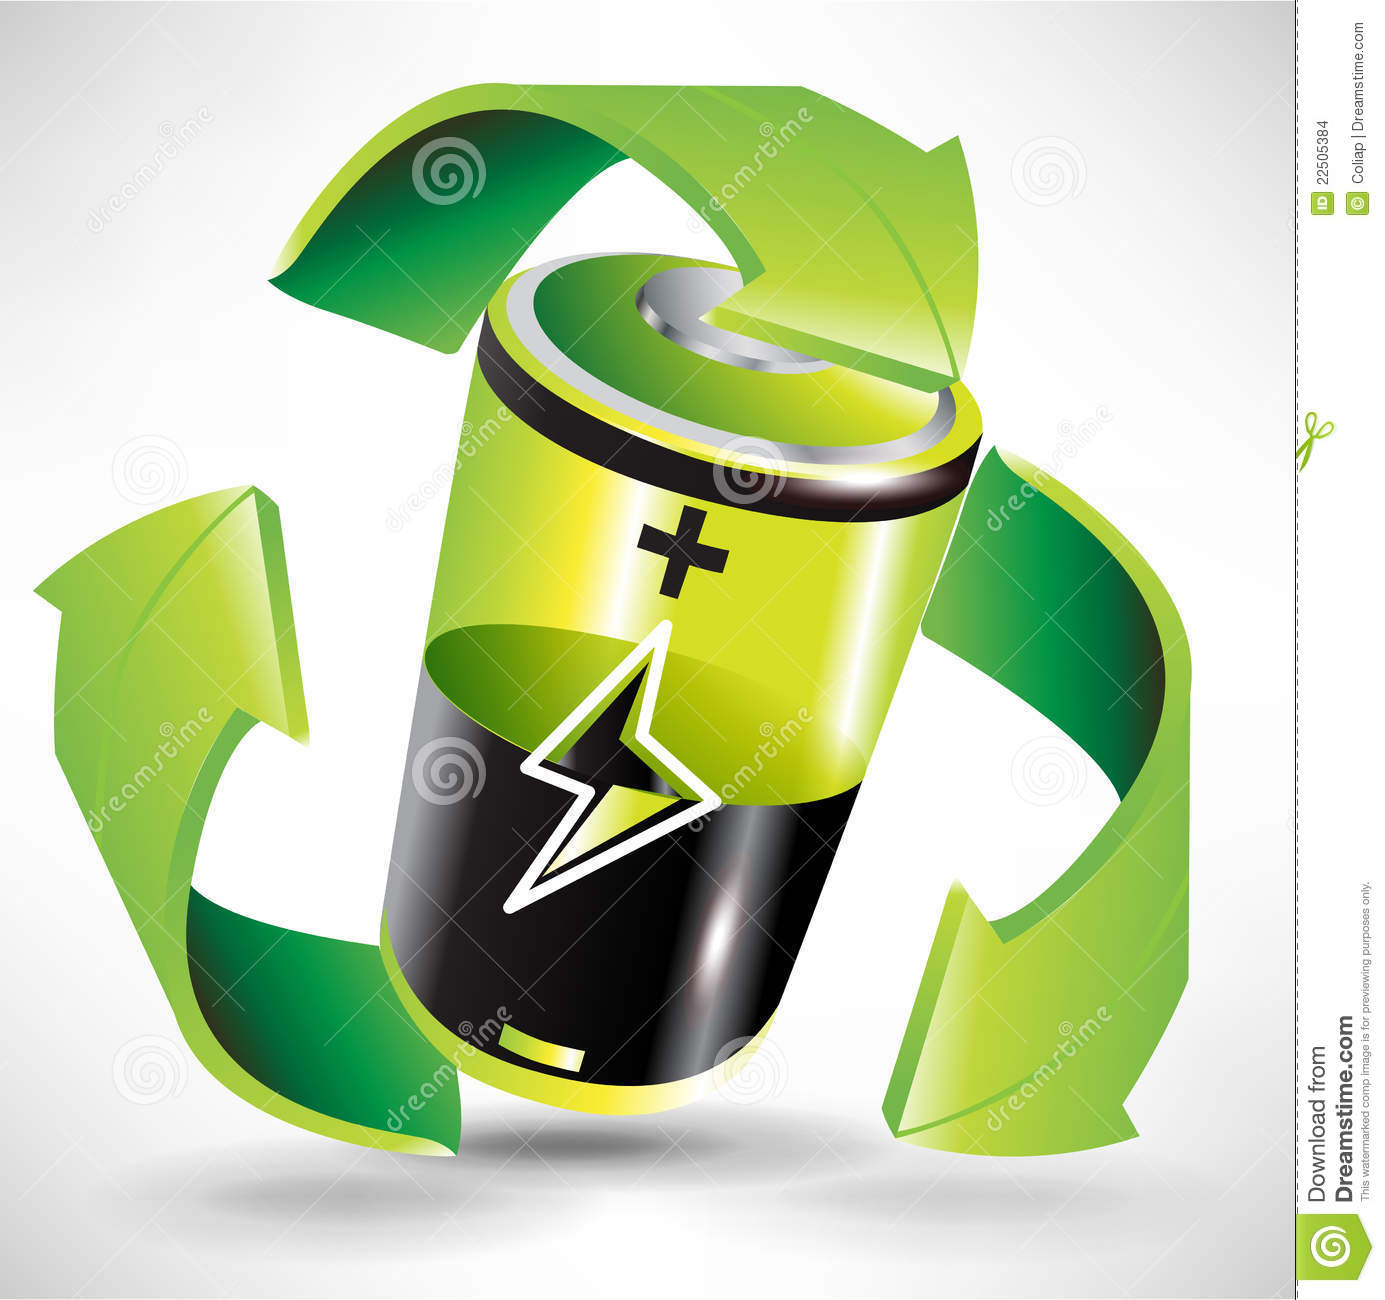 Green Battery Recycling Concept Stock Images   Image  22505384